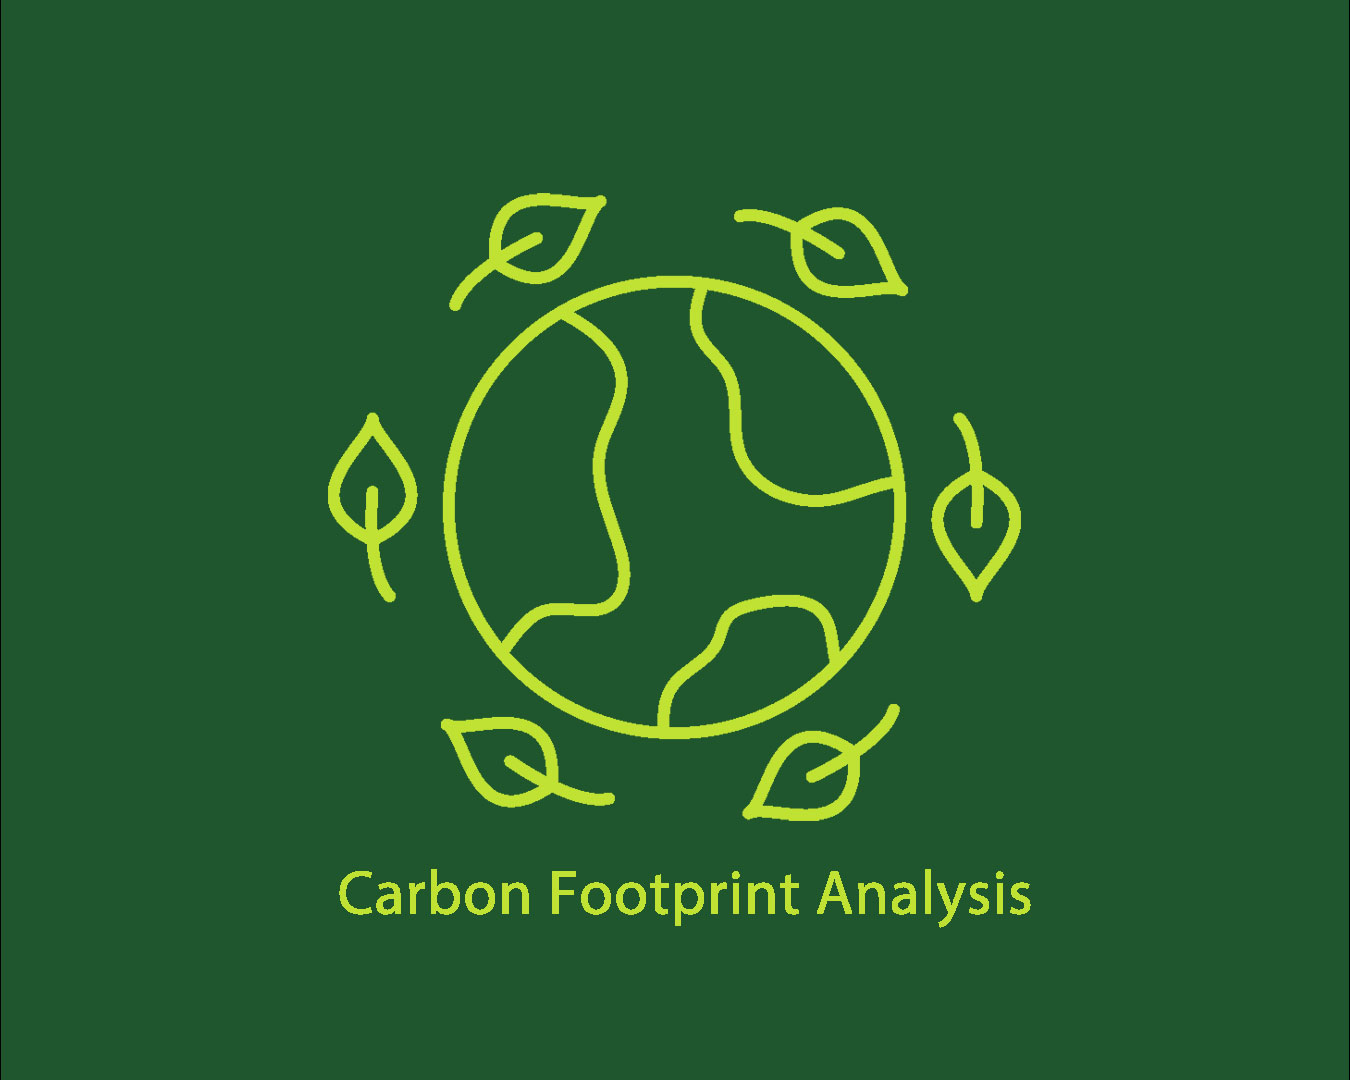 What Is a Carbon Footprint?